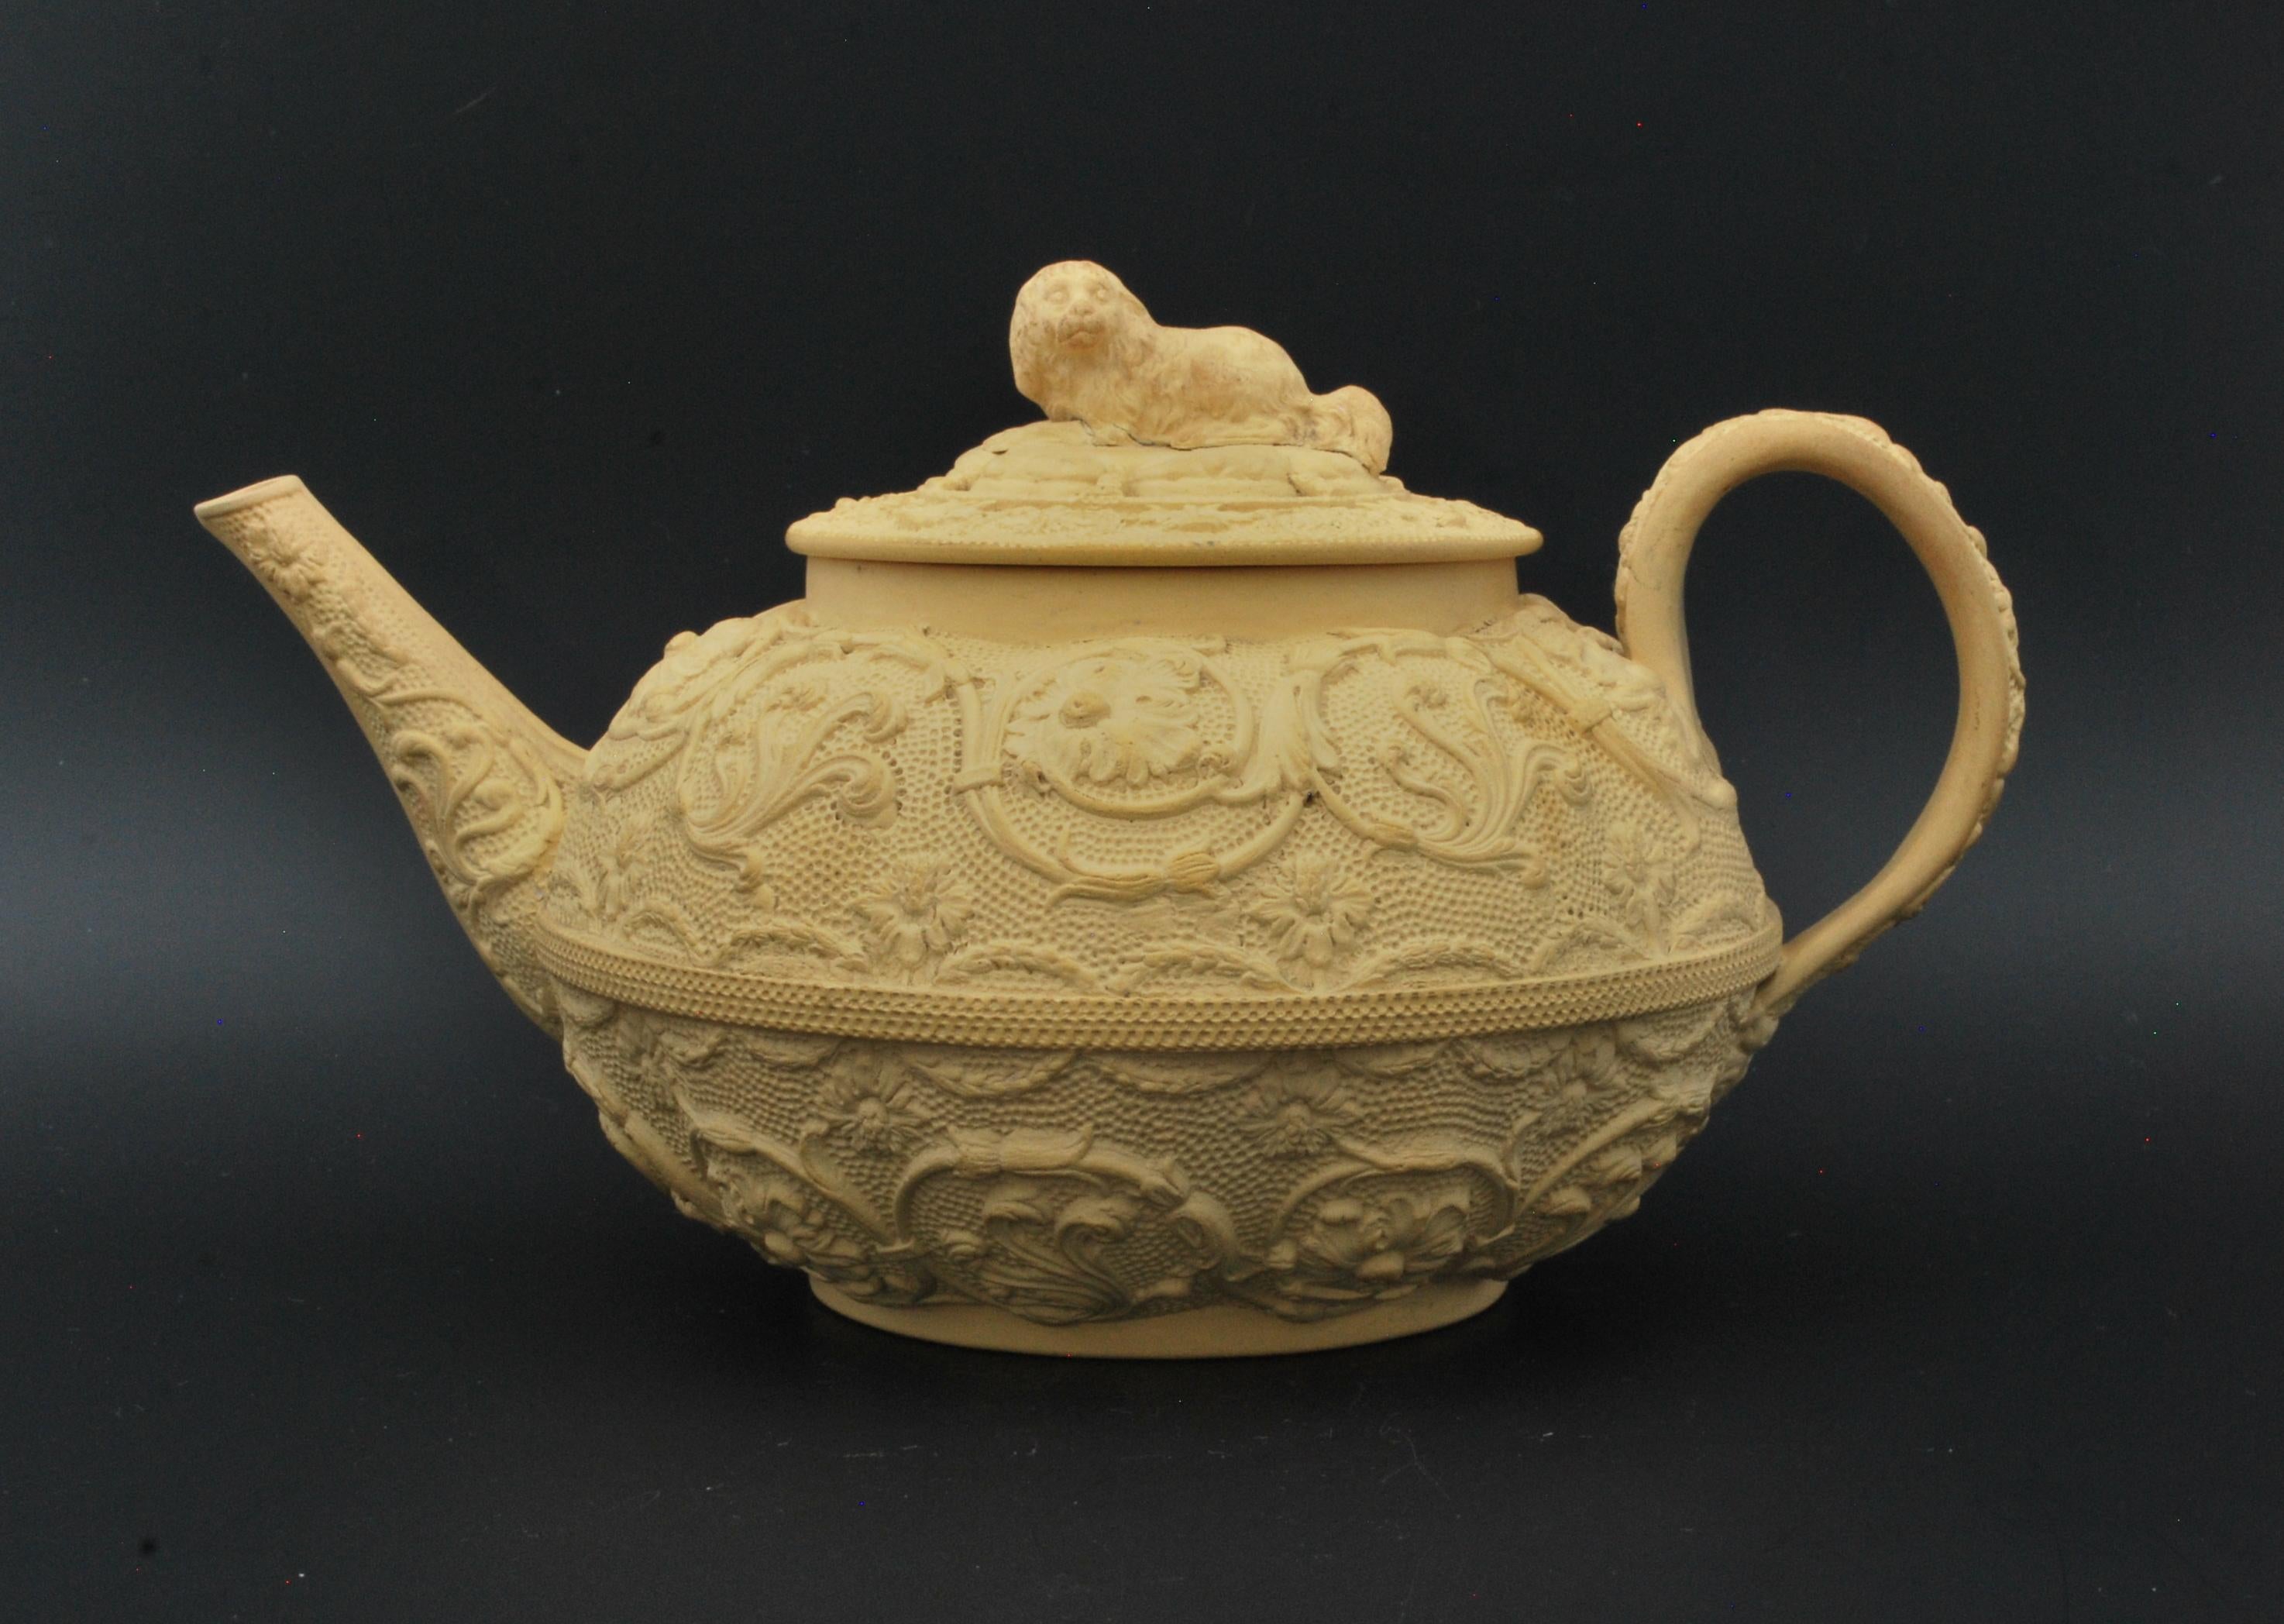 An unglazed caneware teapot of depressed oval shape, with arabesque decoration and a spaniel finial.

Wedgwood caneware is a type of pottery that was first produced by the Wedgwood company in the late 18th century. It was named 